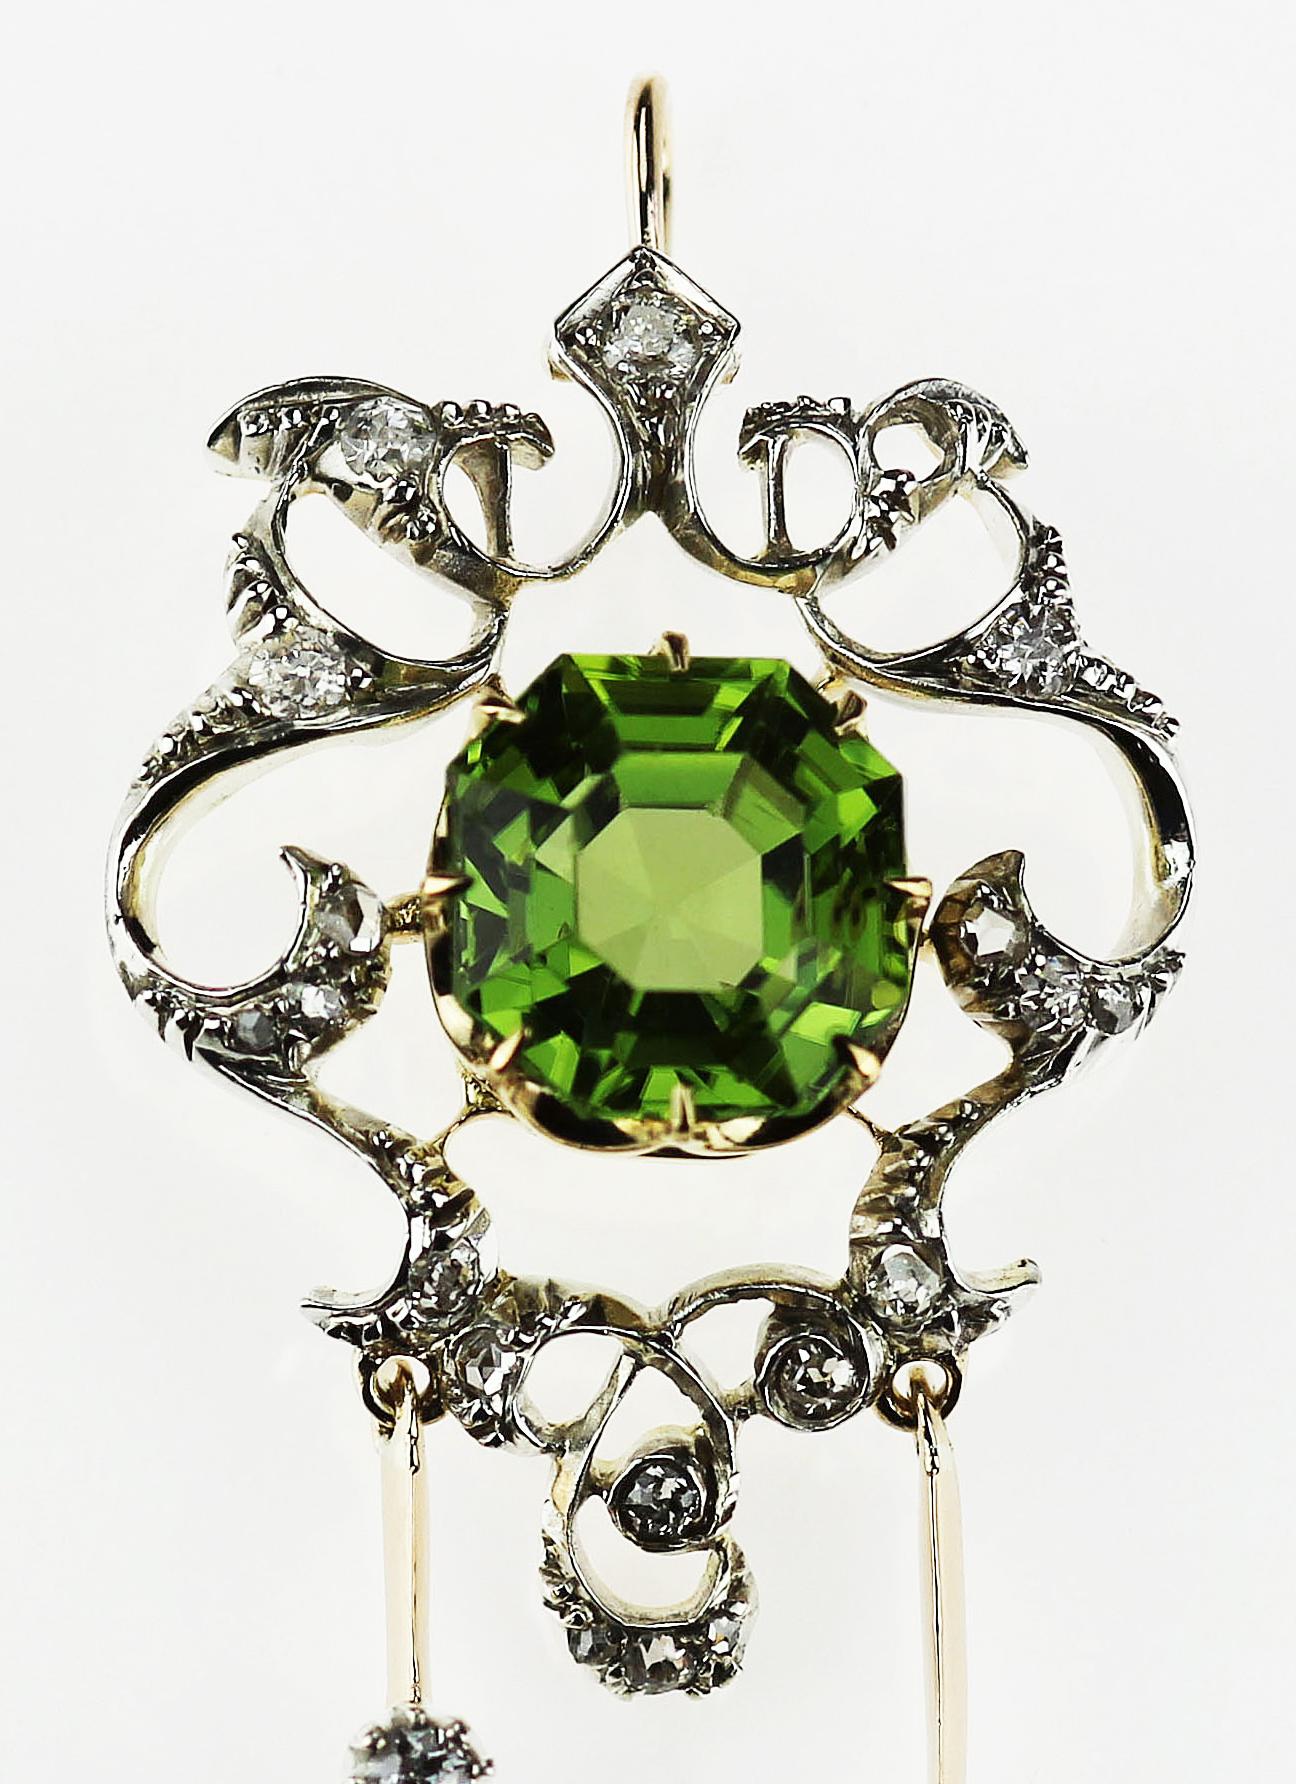 Antique, Victorian  Peridot and diamond pendant/brooch set in 18K yellow gold and silver, with detachable brooch fitting.
1 x Cut corner rectangular Peridot, approximate weight 3.3 carats
19 x Old European and Rose cut diamonds, approximate total